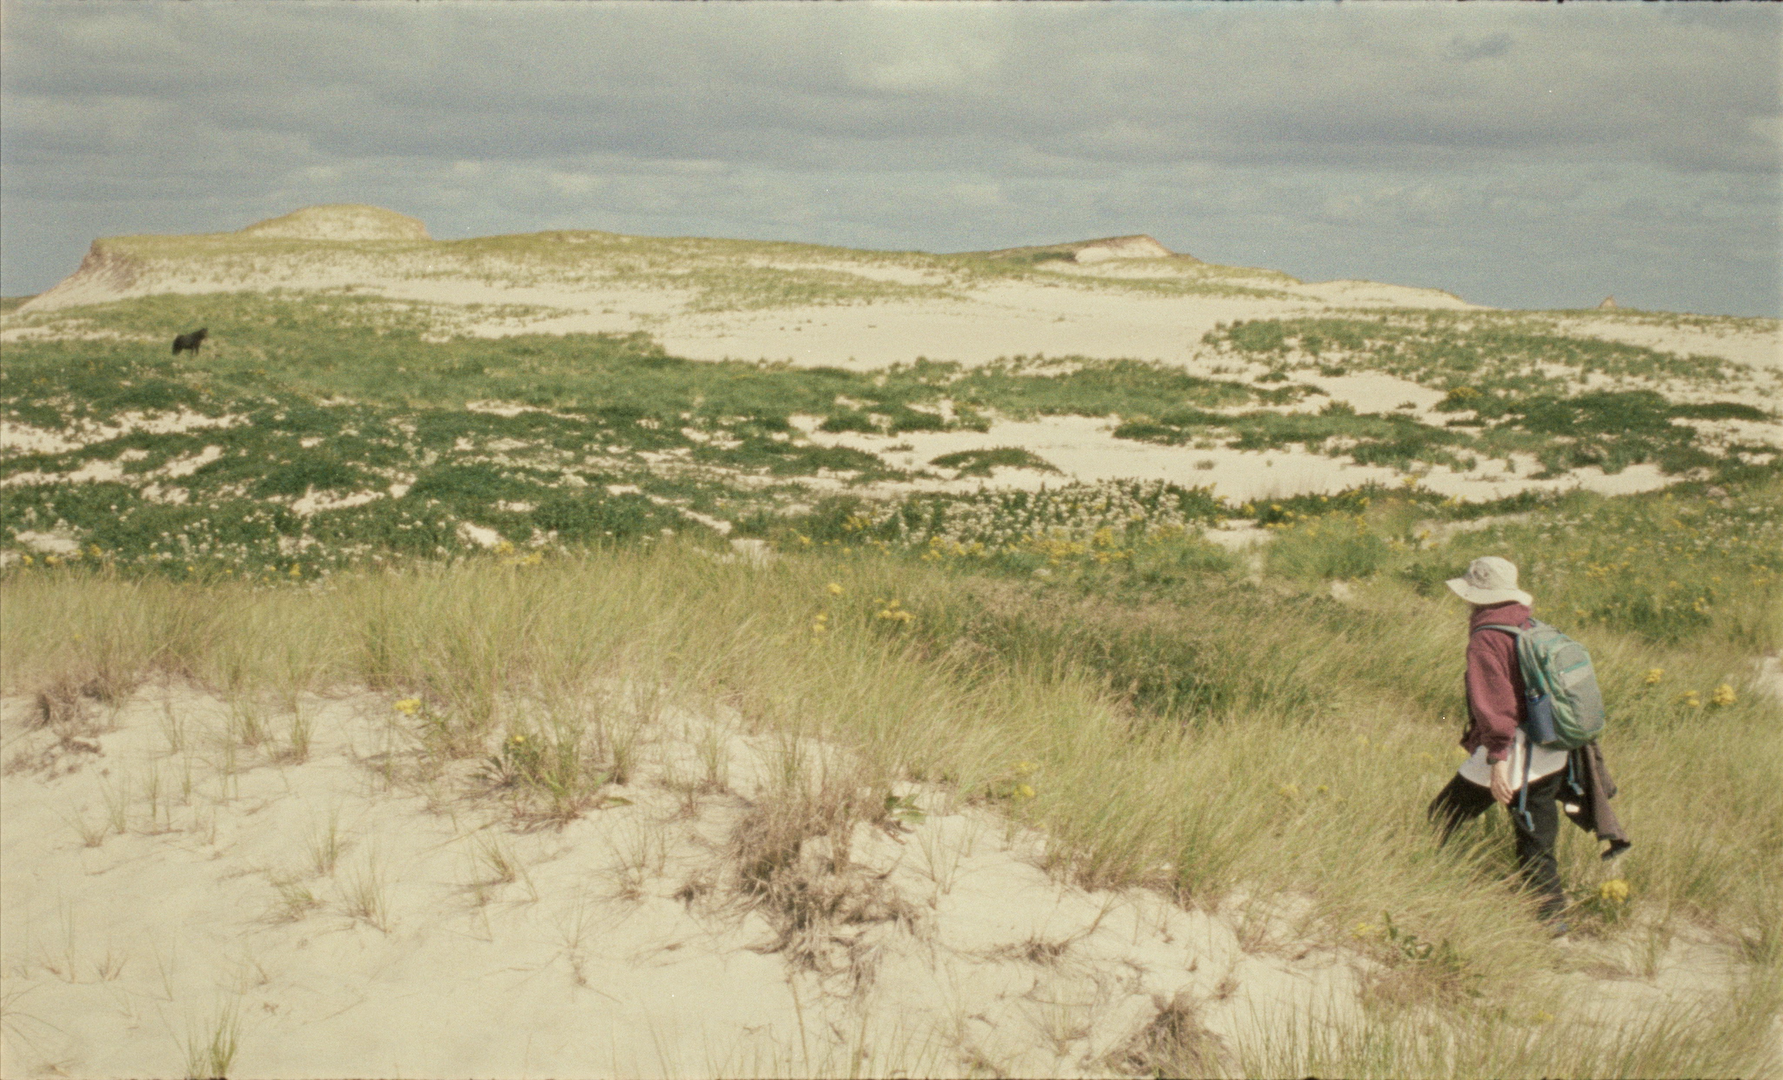 A white woman, wearing a floppy hat and a backpack, walks across a grassy terrain. From Jacquelyn Mills' 'Geographies of Solitude.' Courtesy of Camden International Film Festival